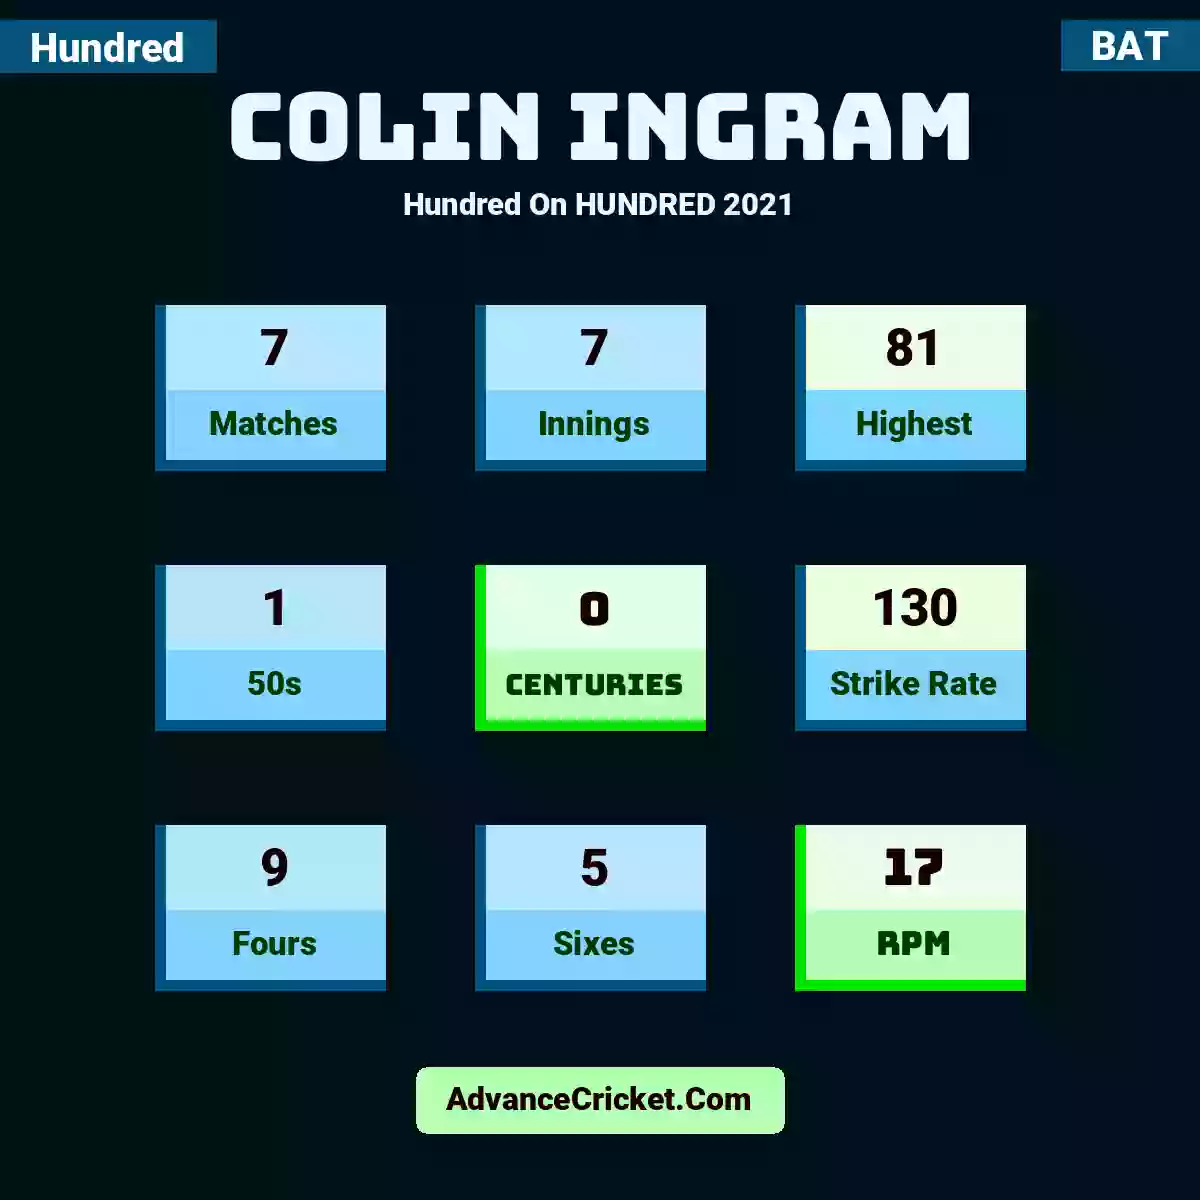 Colin Ingram Hundred  On HUNDRED 2021, Colin Ingram played 7 matches, scored 81 runs as highest, 1 half-centuries, and 0 centuries, with a strike rate of 130. C.Ingram hit 9 fours and 5 sixes, with an RPM of 17.